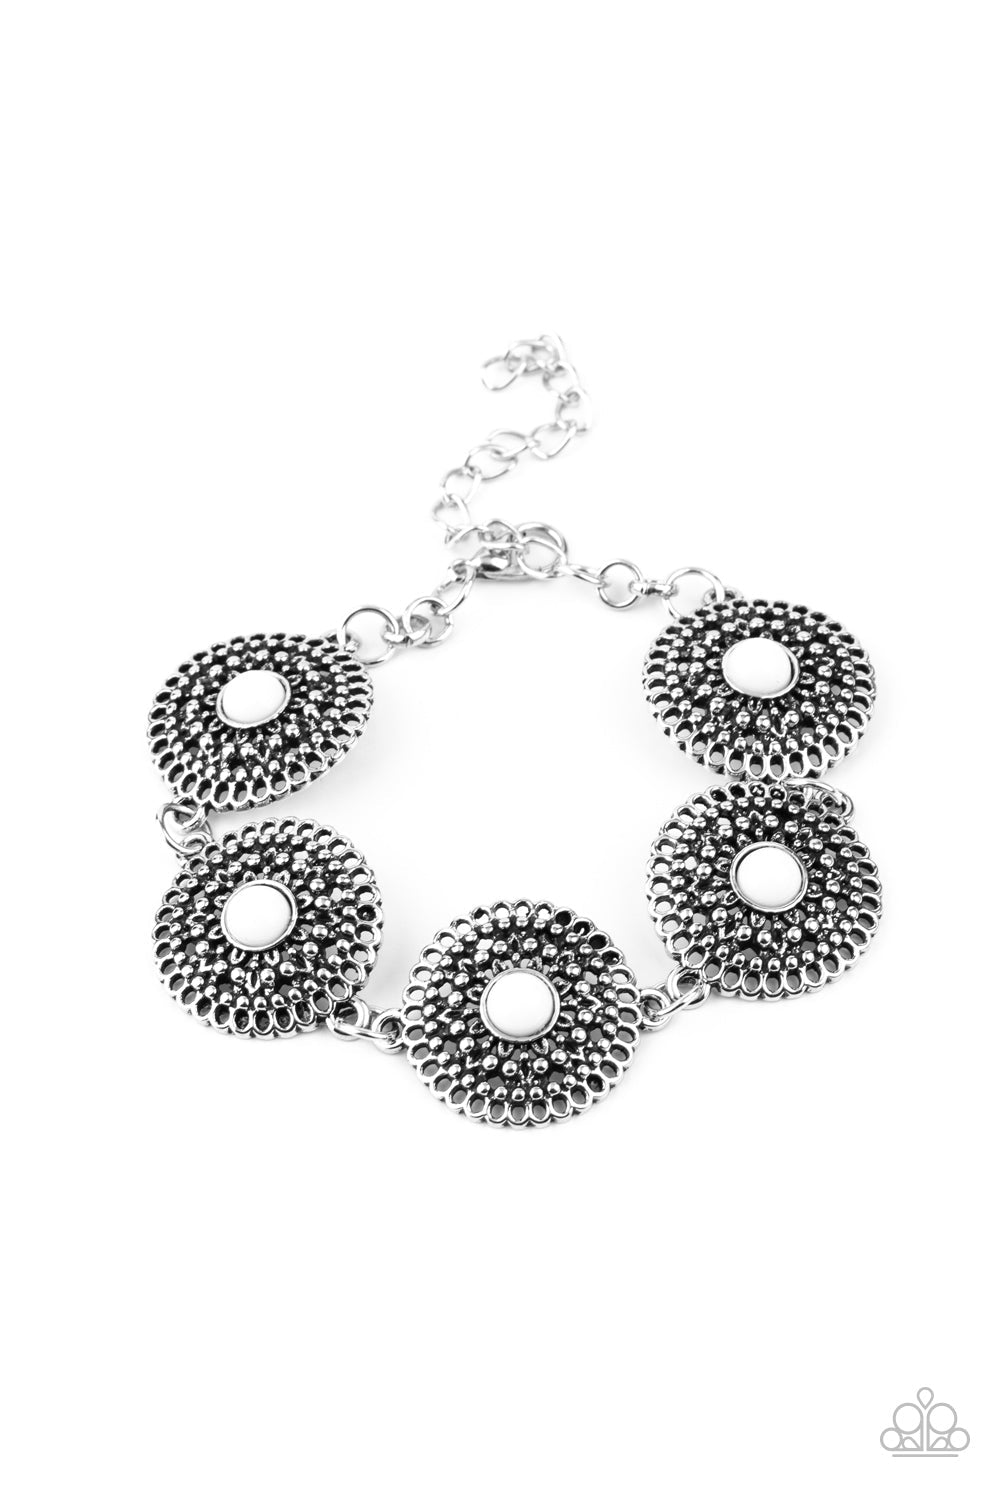 Mojave Mandalas - White and Silver Stylish Bracelet - Paparazzi Accessories - Dotted with dainty white beaded centers, shimmery studded silver floral frames delicately linked around the wrist for a colorfully whimsical look. Features an adjustable clasp closure. Trendy fashion jewelry for everyone.